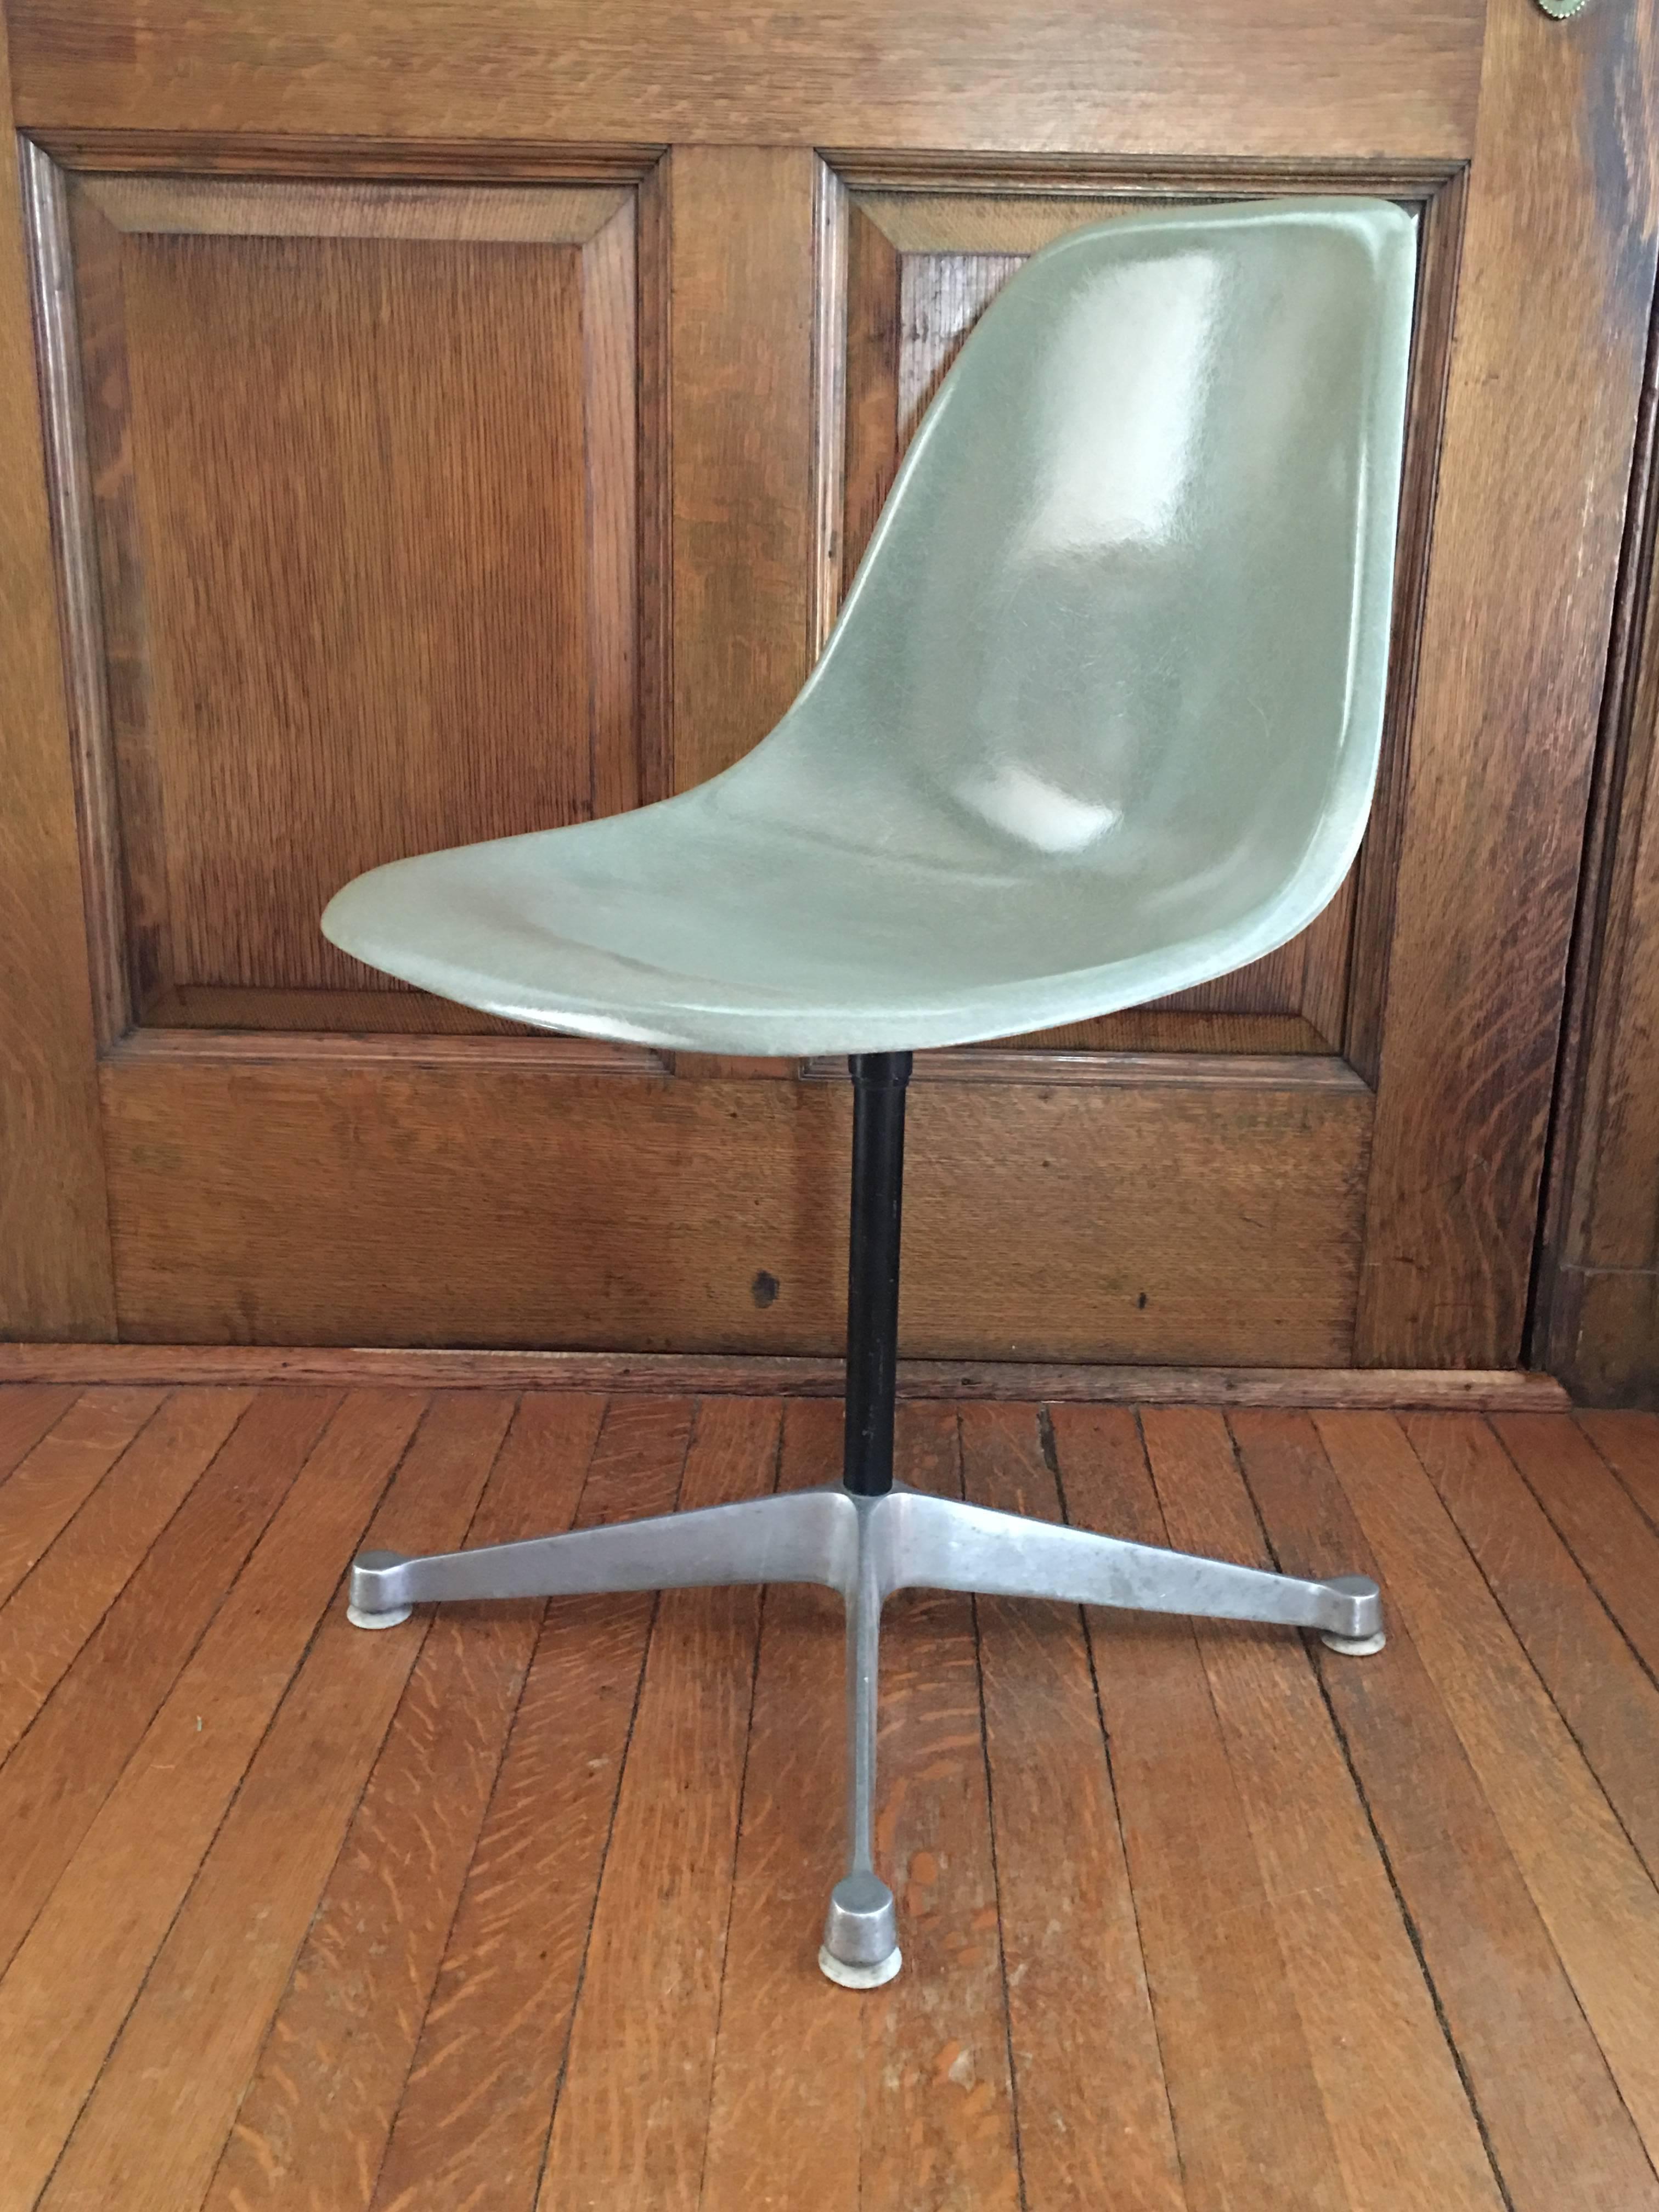 Herman Miller Eames seafoam green desk chair on aluminium contract base. Shell in perfect vintage condition. Base excellent with normal wear. Swivel function is perfect and smooth with no friction or noises.